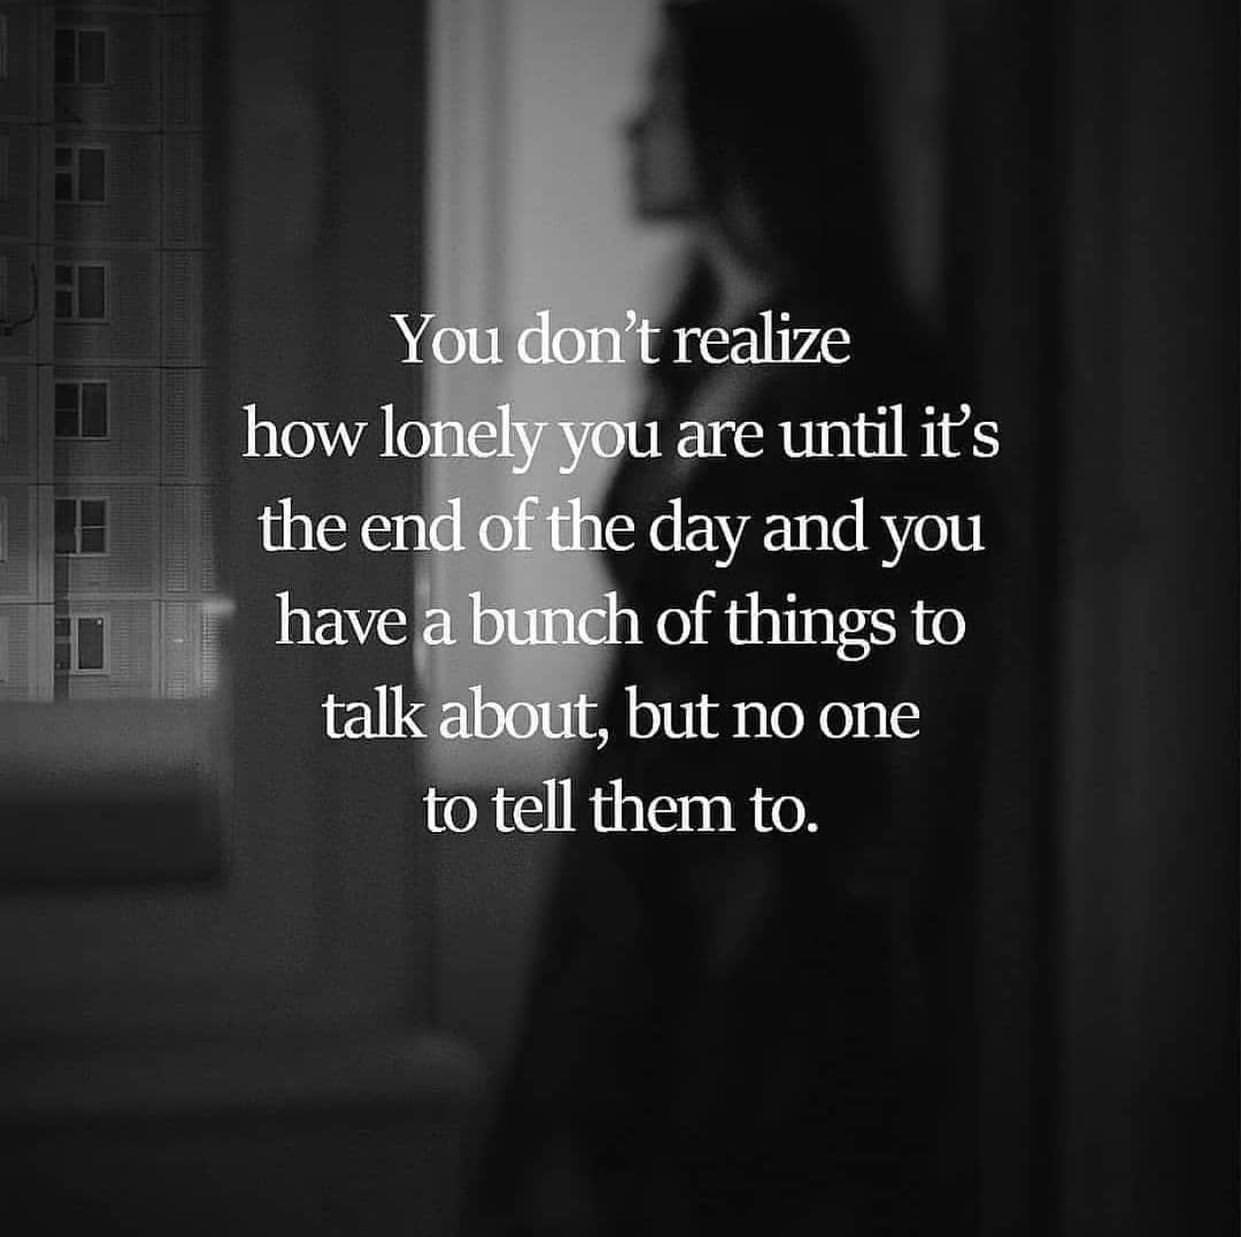 You don't realize how lonely you are until is the end of the day and you have a bunch of things to talk about, but no one to tell them to.